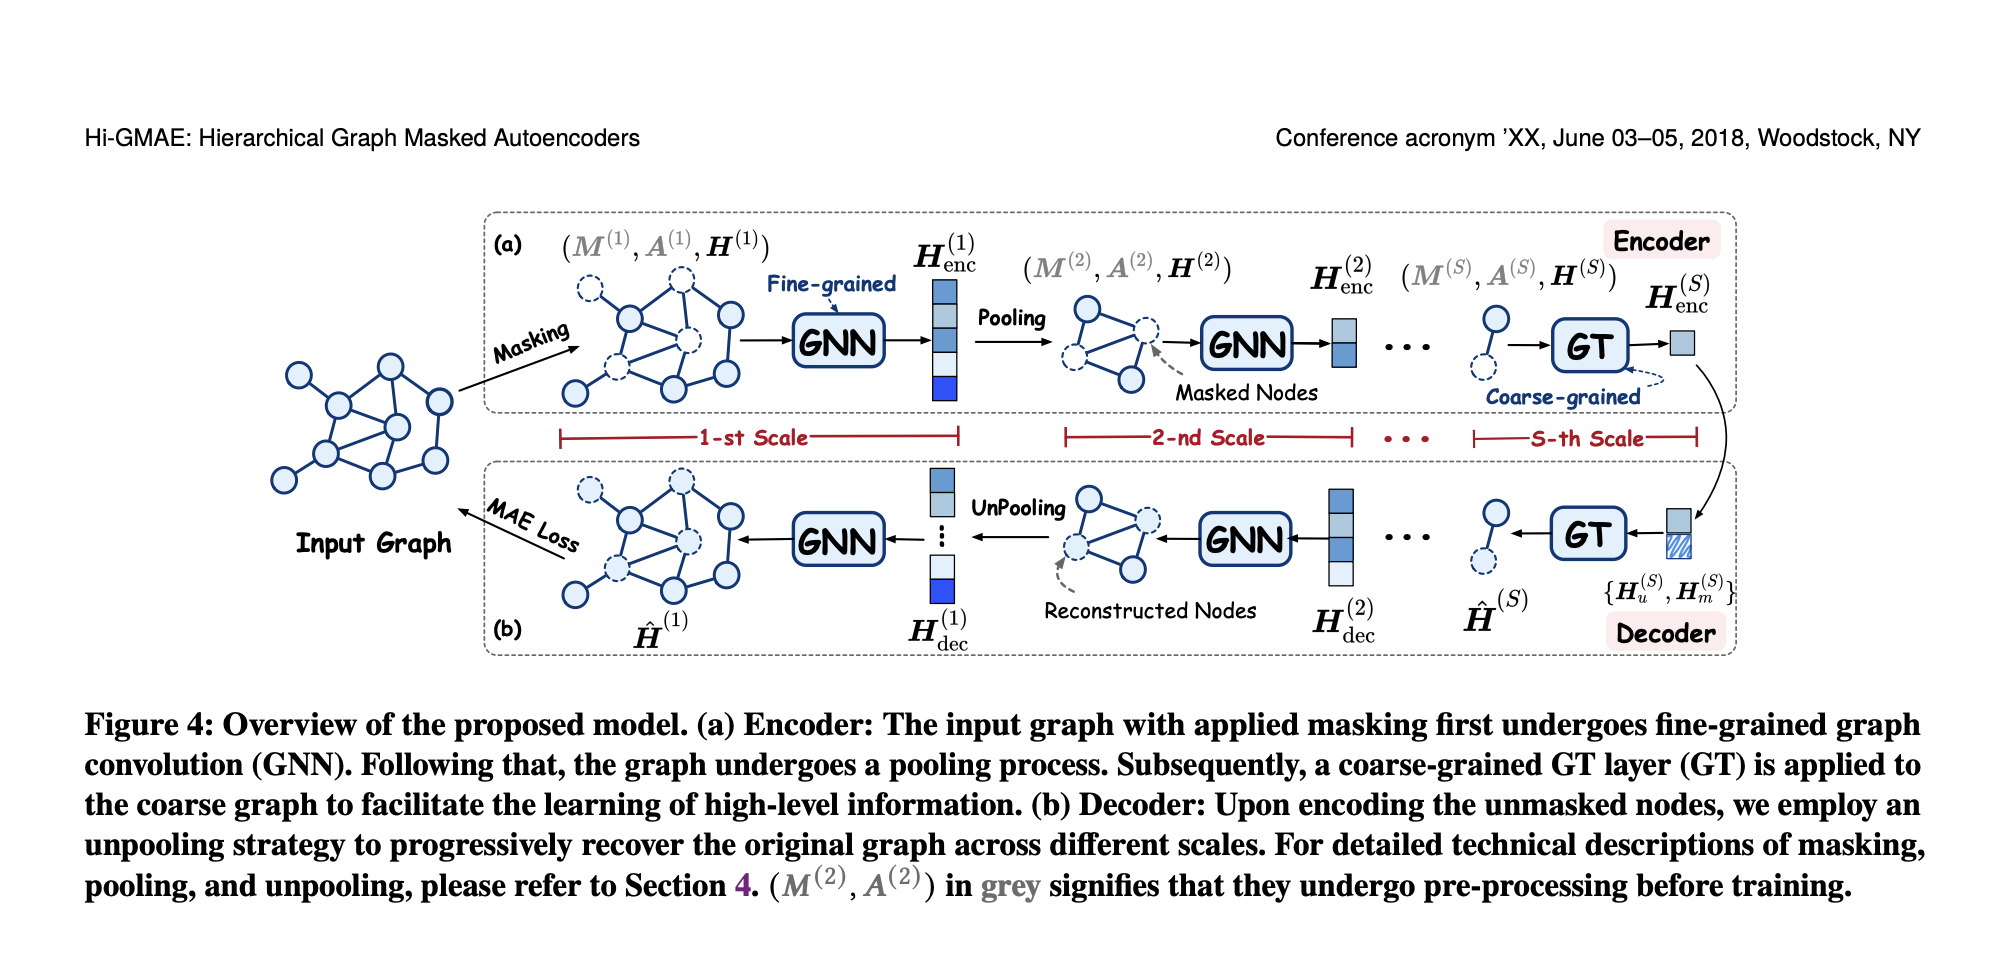  Hierarchical Graph Masked AutoEncoders (Hi-GMAE): A Novel Multi-Scale GMAE Framework Designed to Handle the Hierarchical Structures within Graph